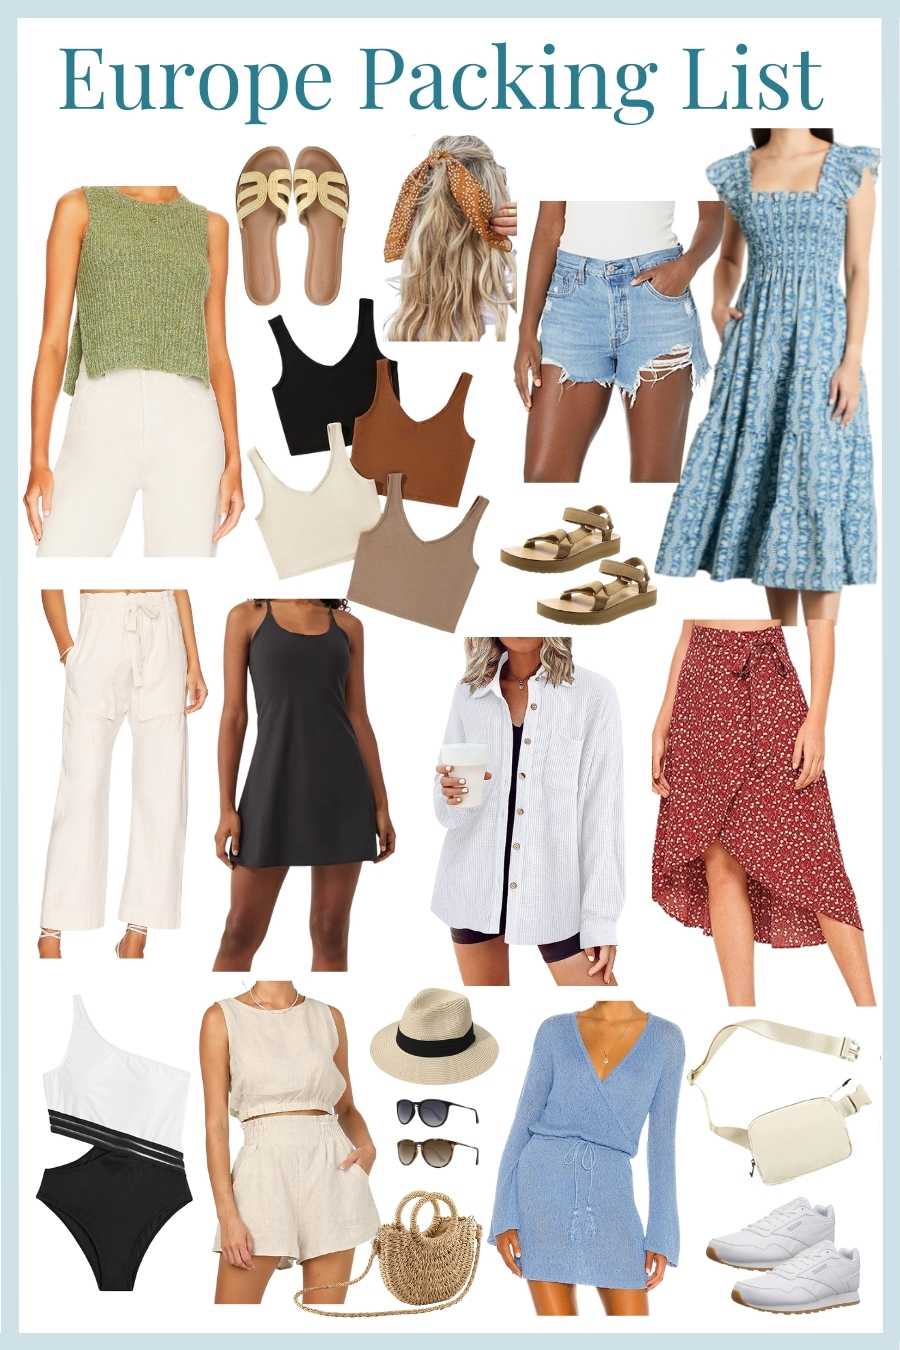 Summer in Europe packing list clothes